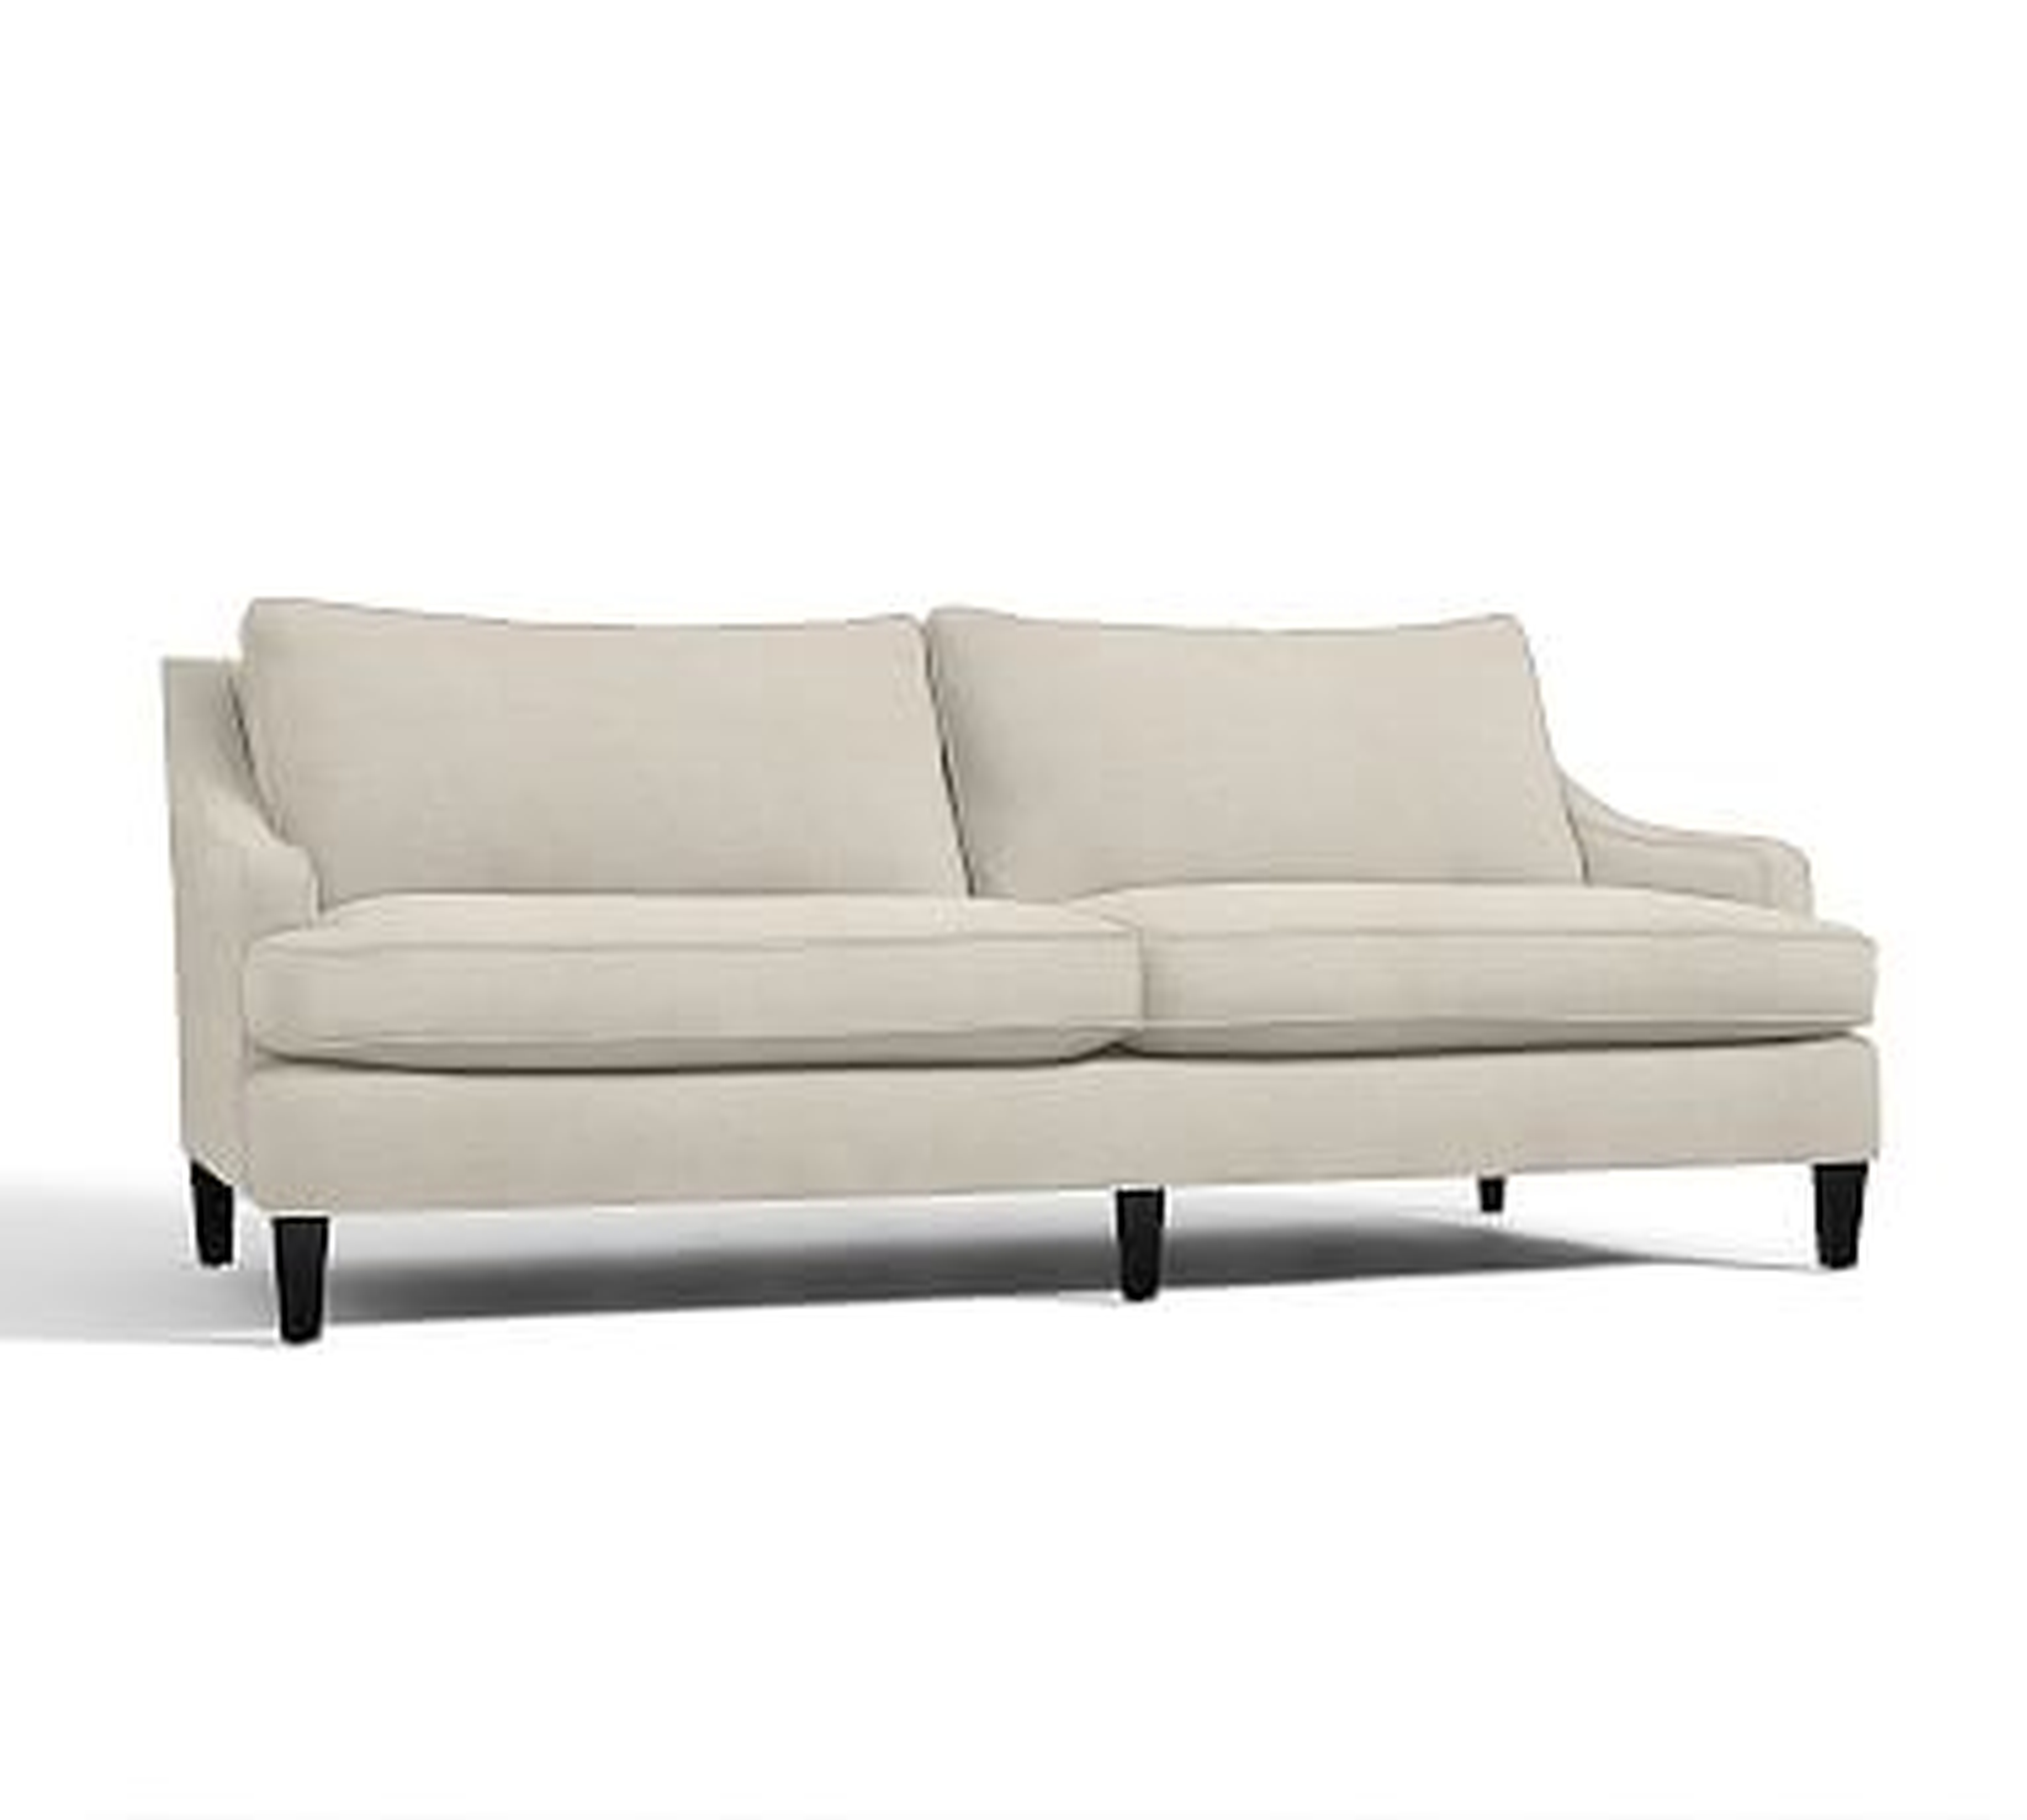 Landon Upholstered Grand Sofa 96.5", Down Blend Wrapped Cushions, Textured Basketweave Flax - Pottery Barn